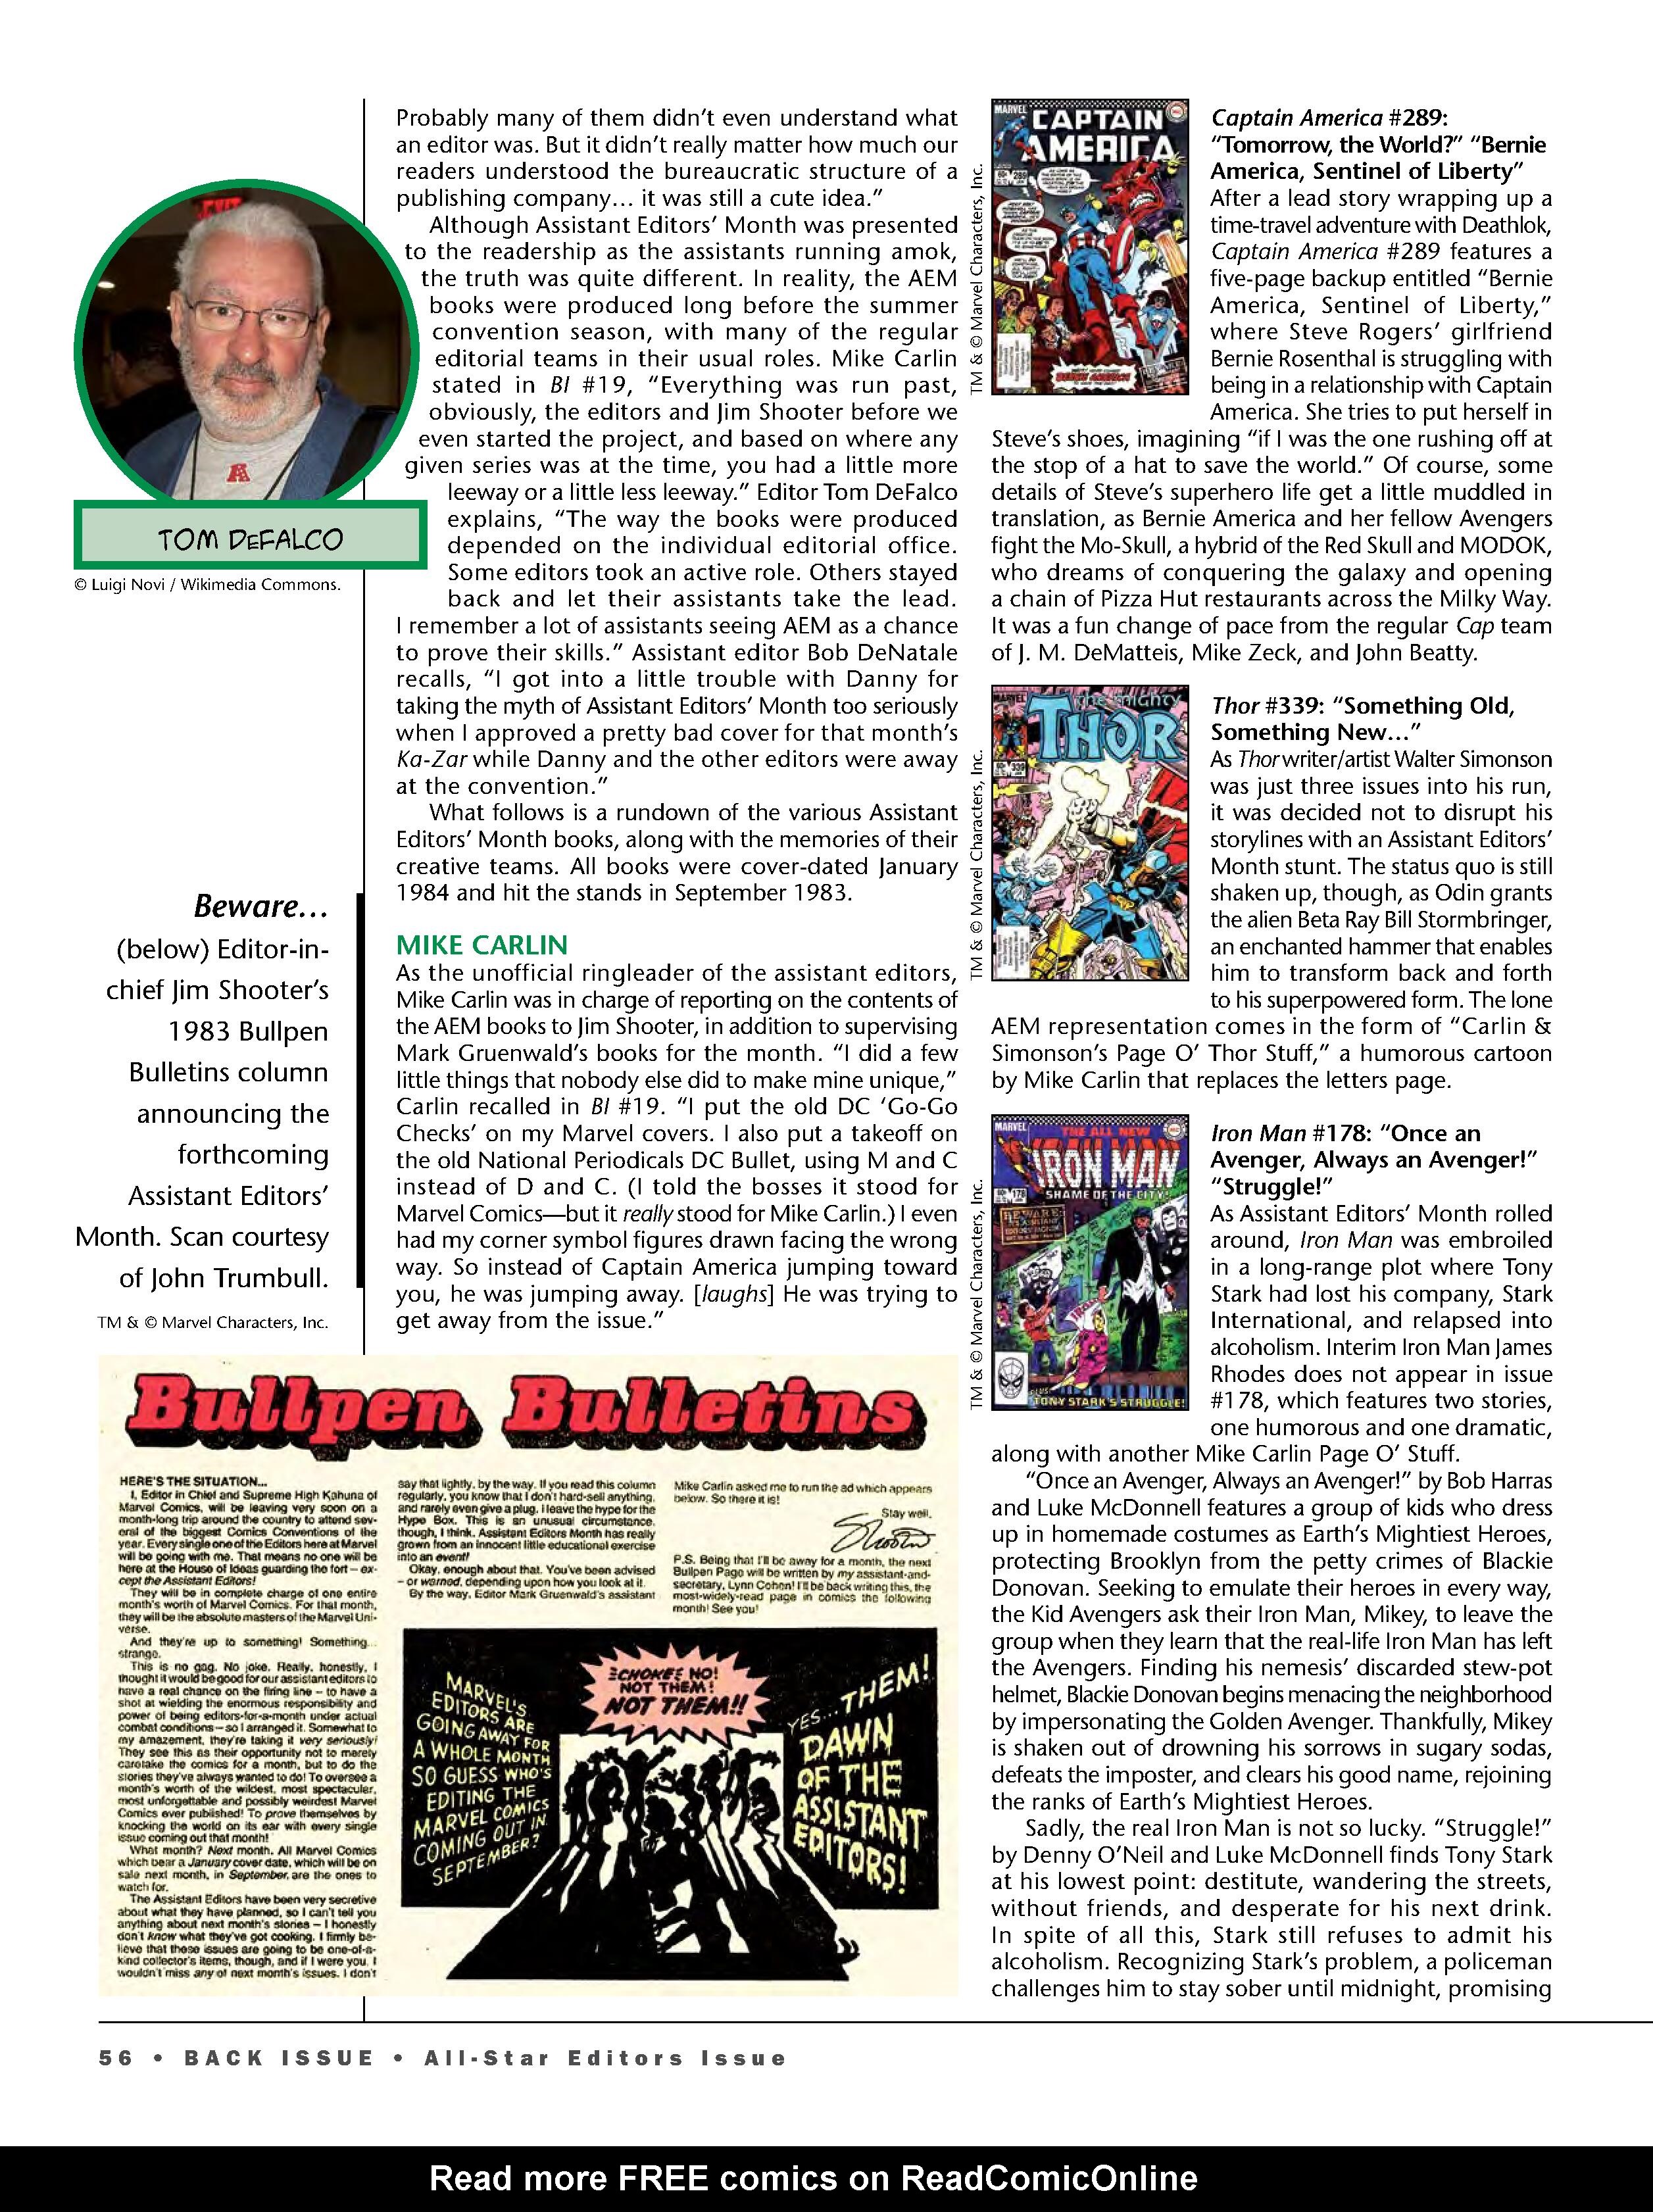 Read online Back Issue comic -  Issue #103 - 58